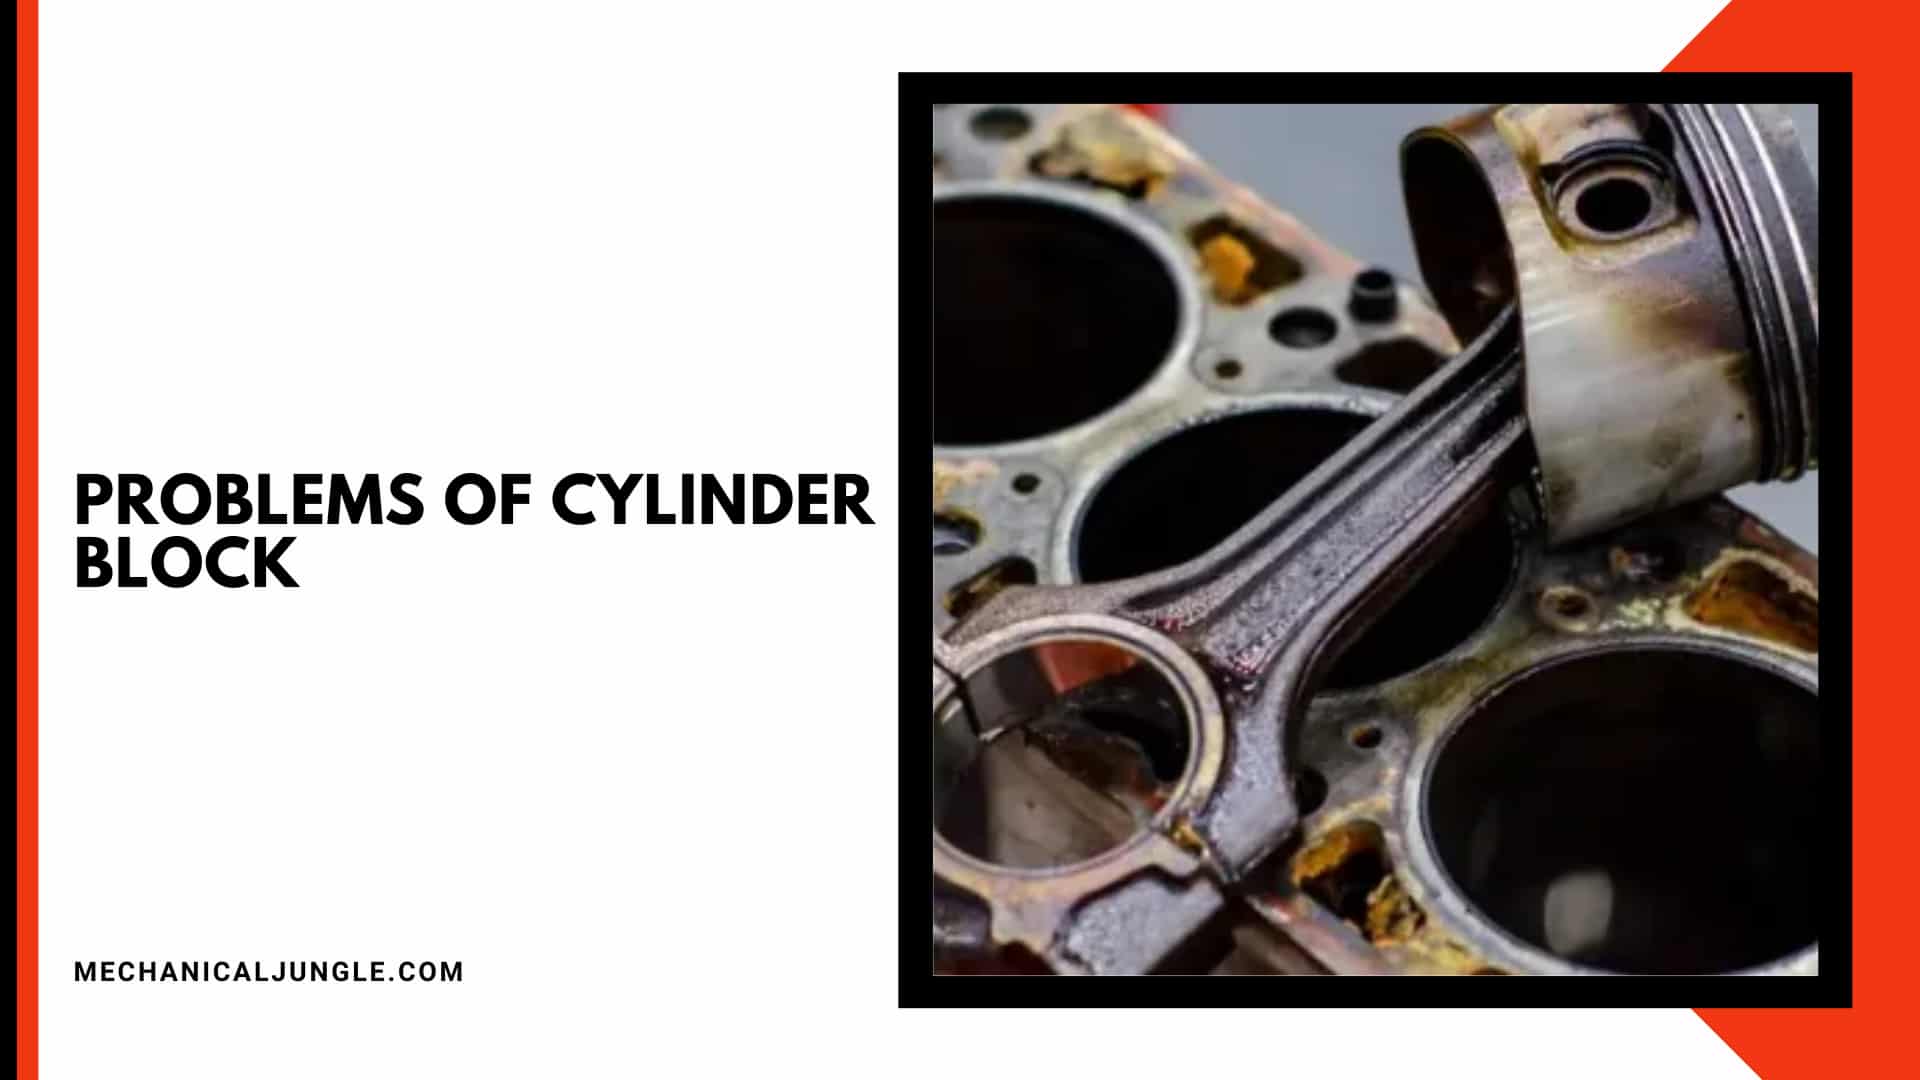 Problems of Cylinder Block